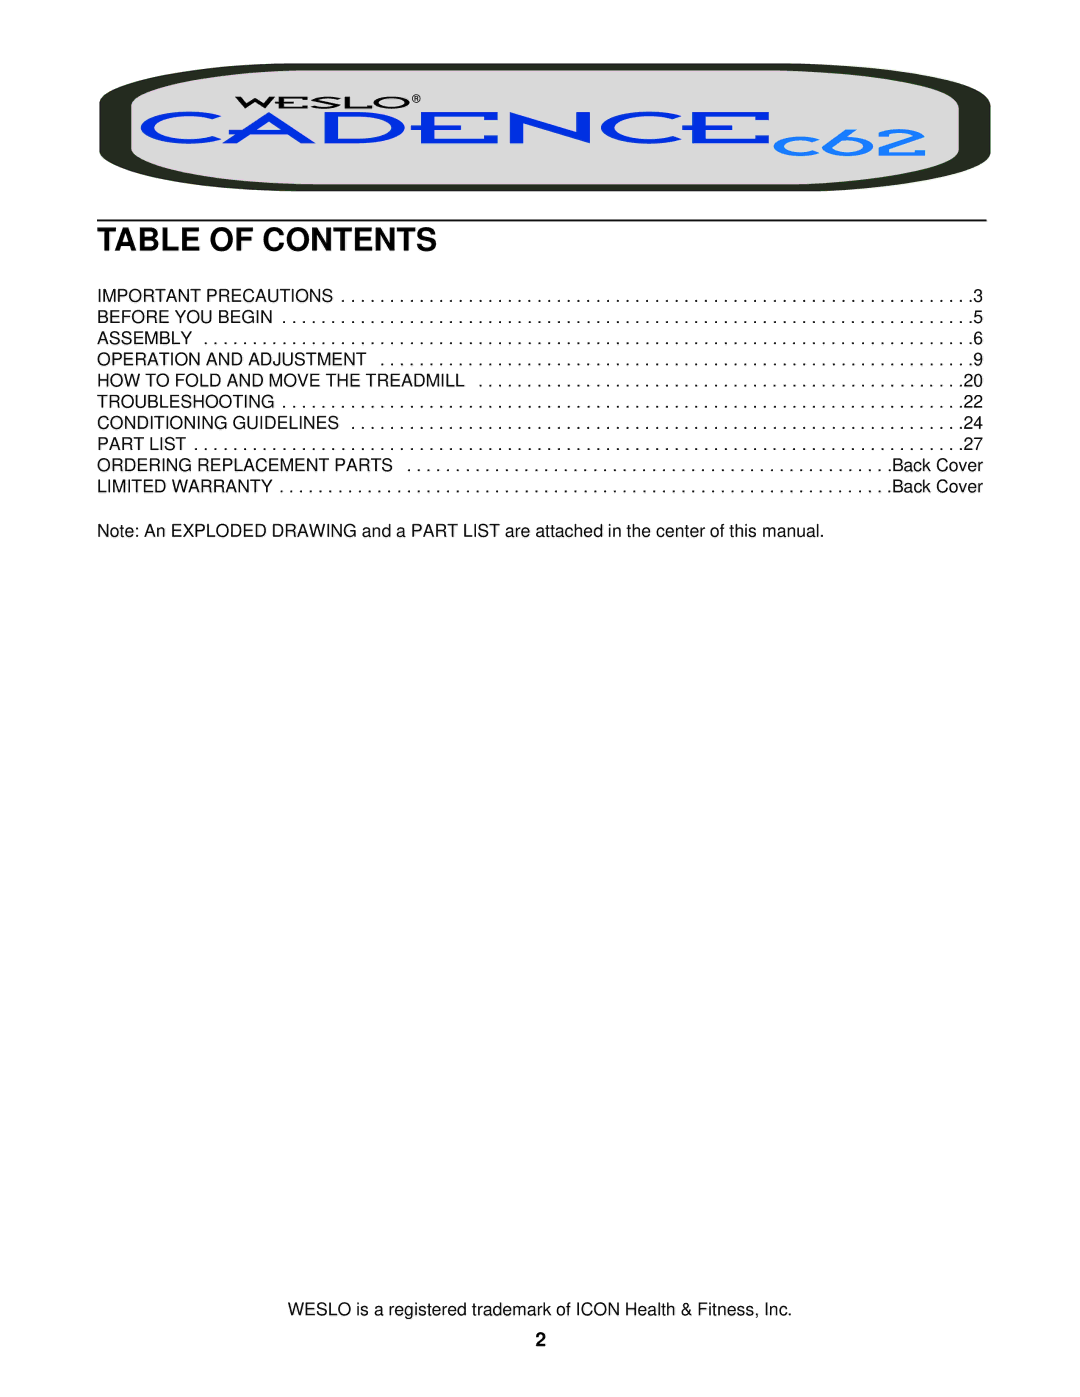 Weslo WLTL39323 user manual Table of Contents 